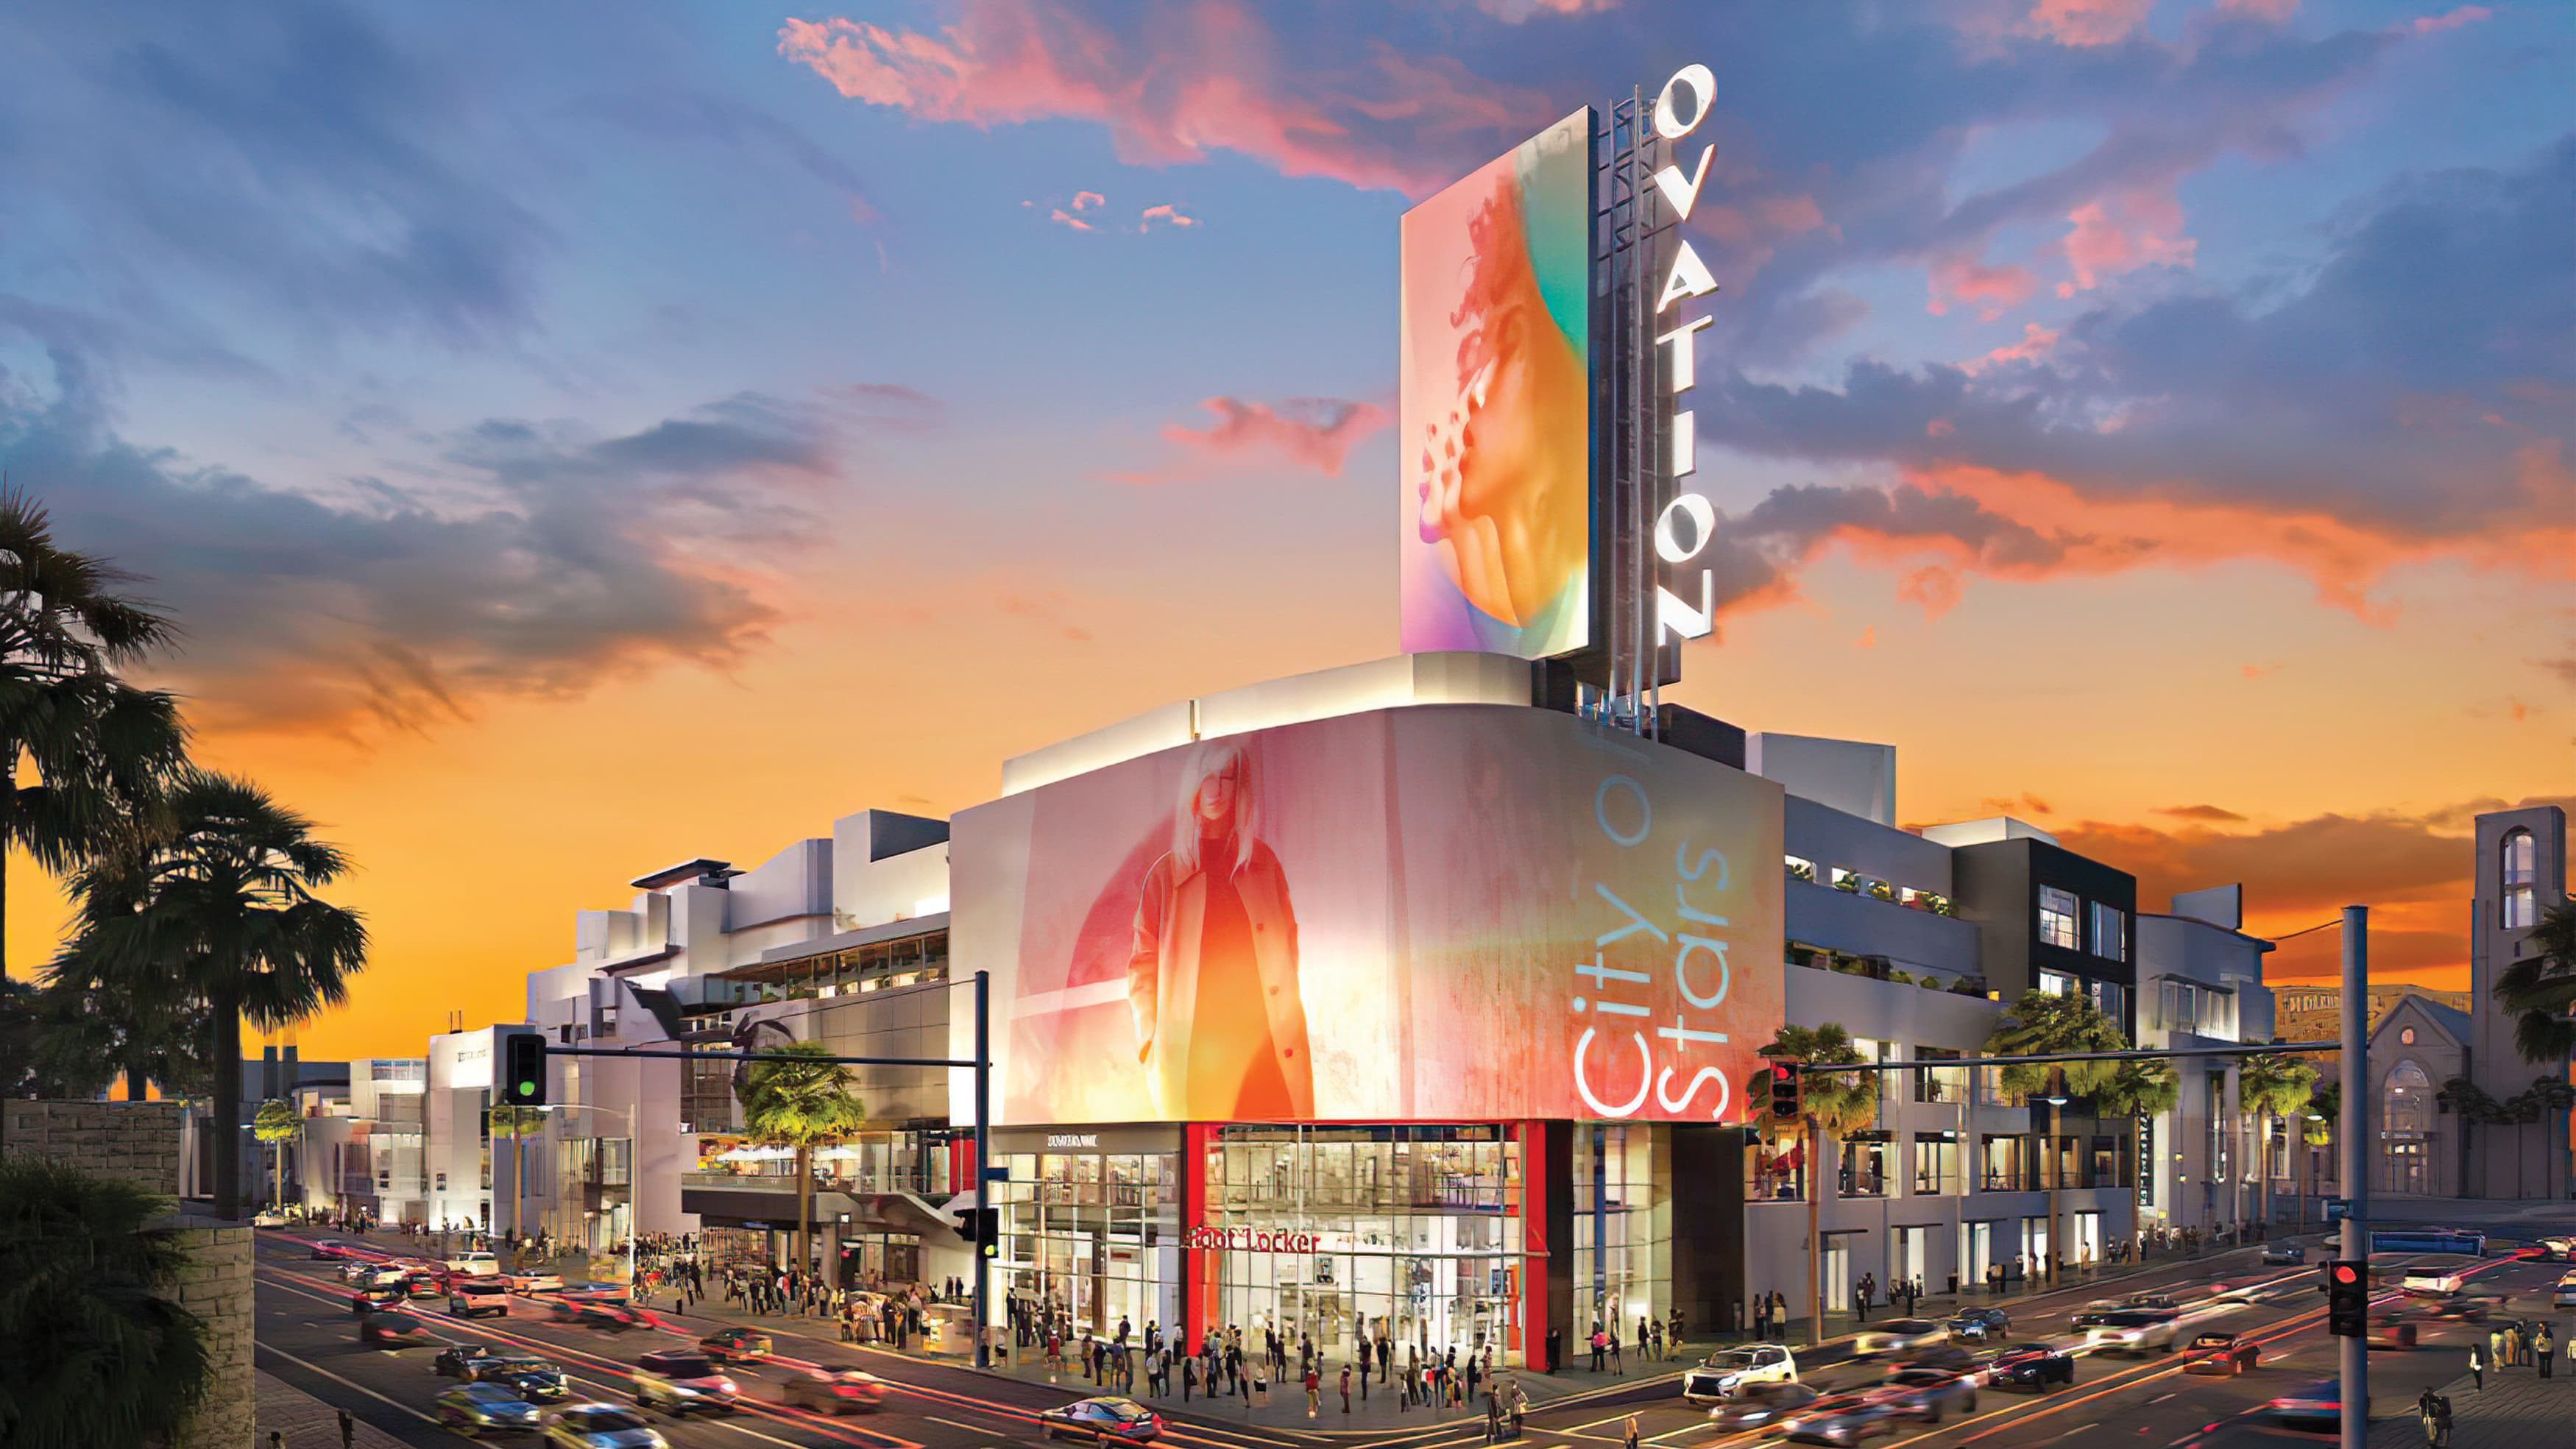 Architectural rendering of Ovation Hollywood project located in Los Angeles.